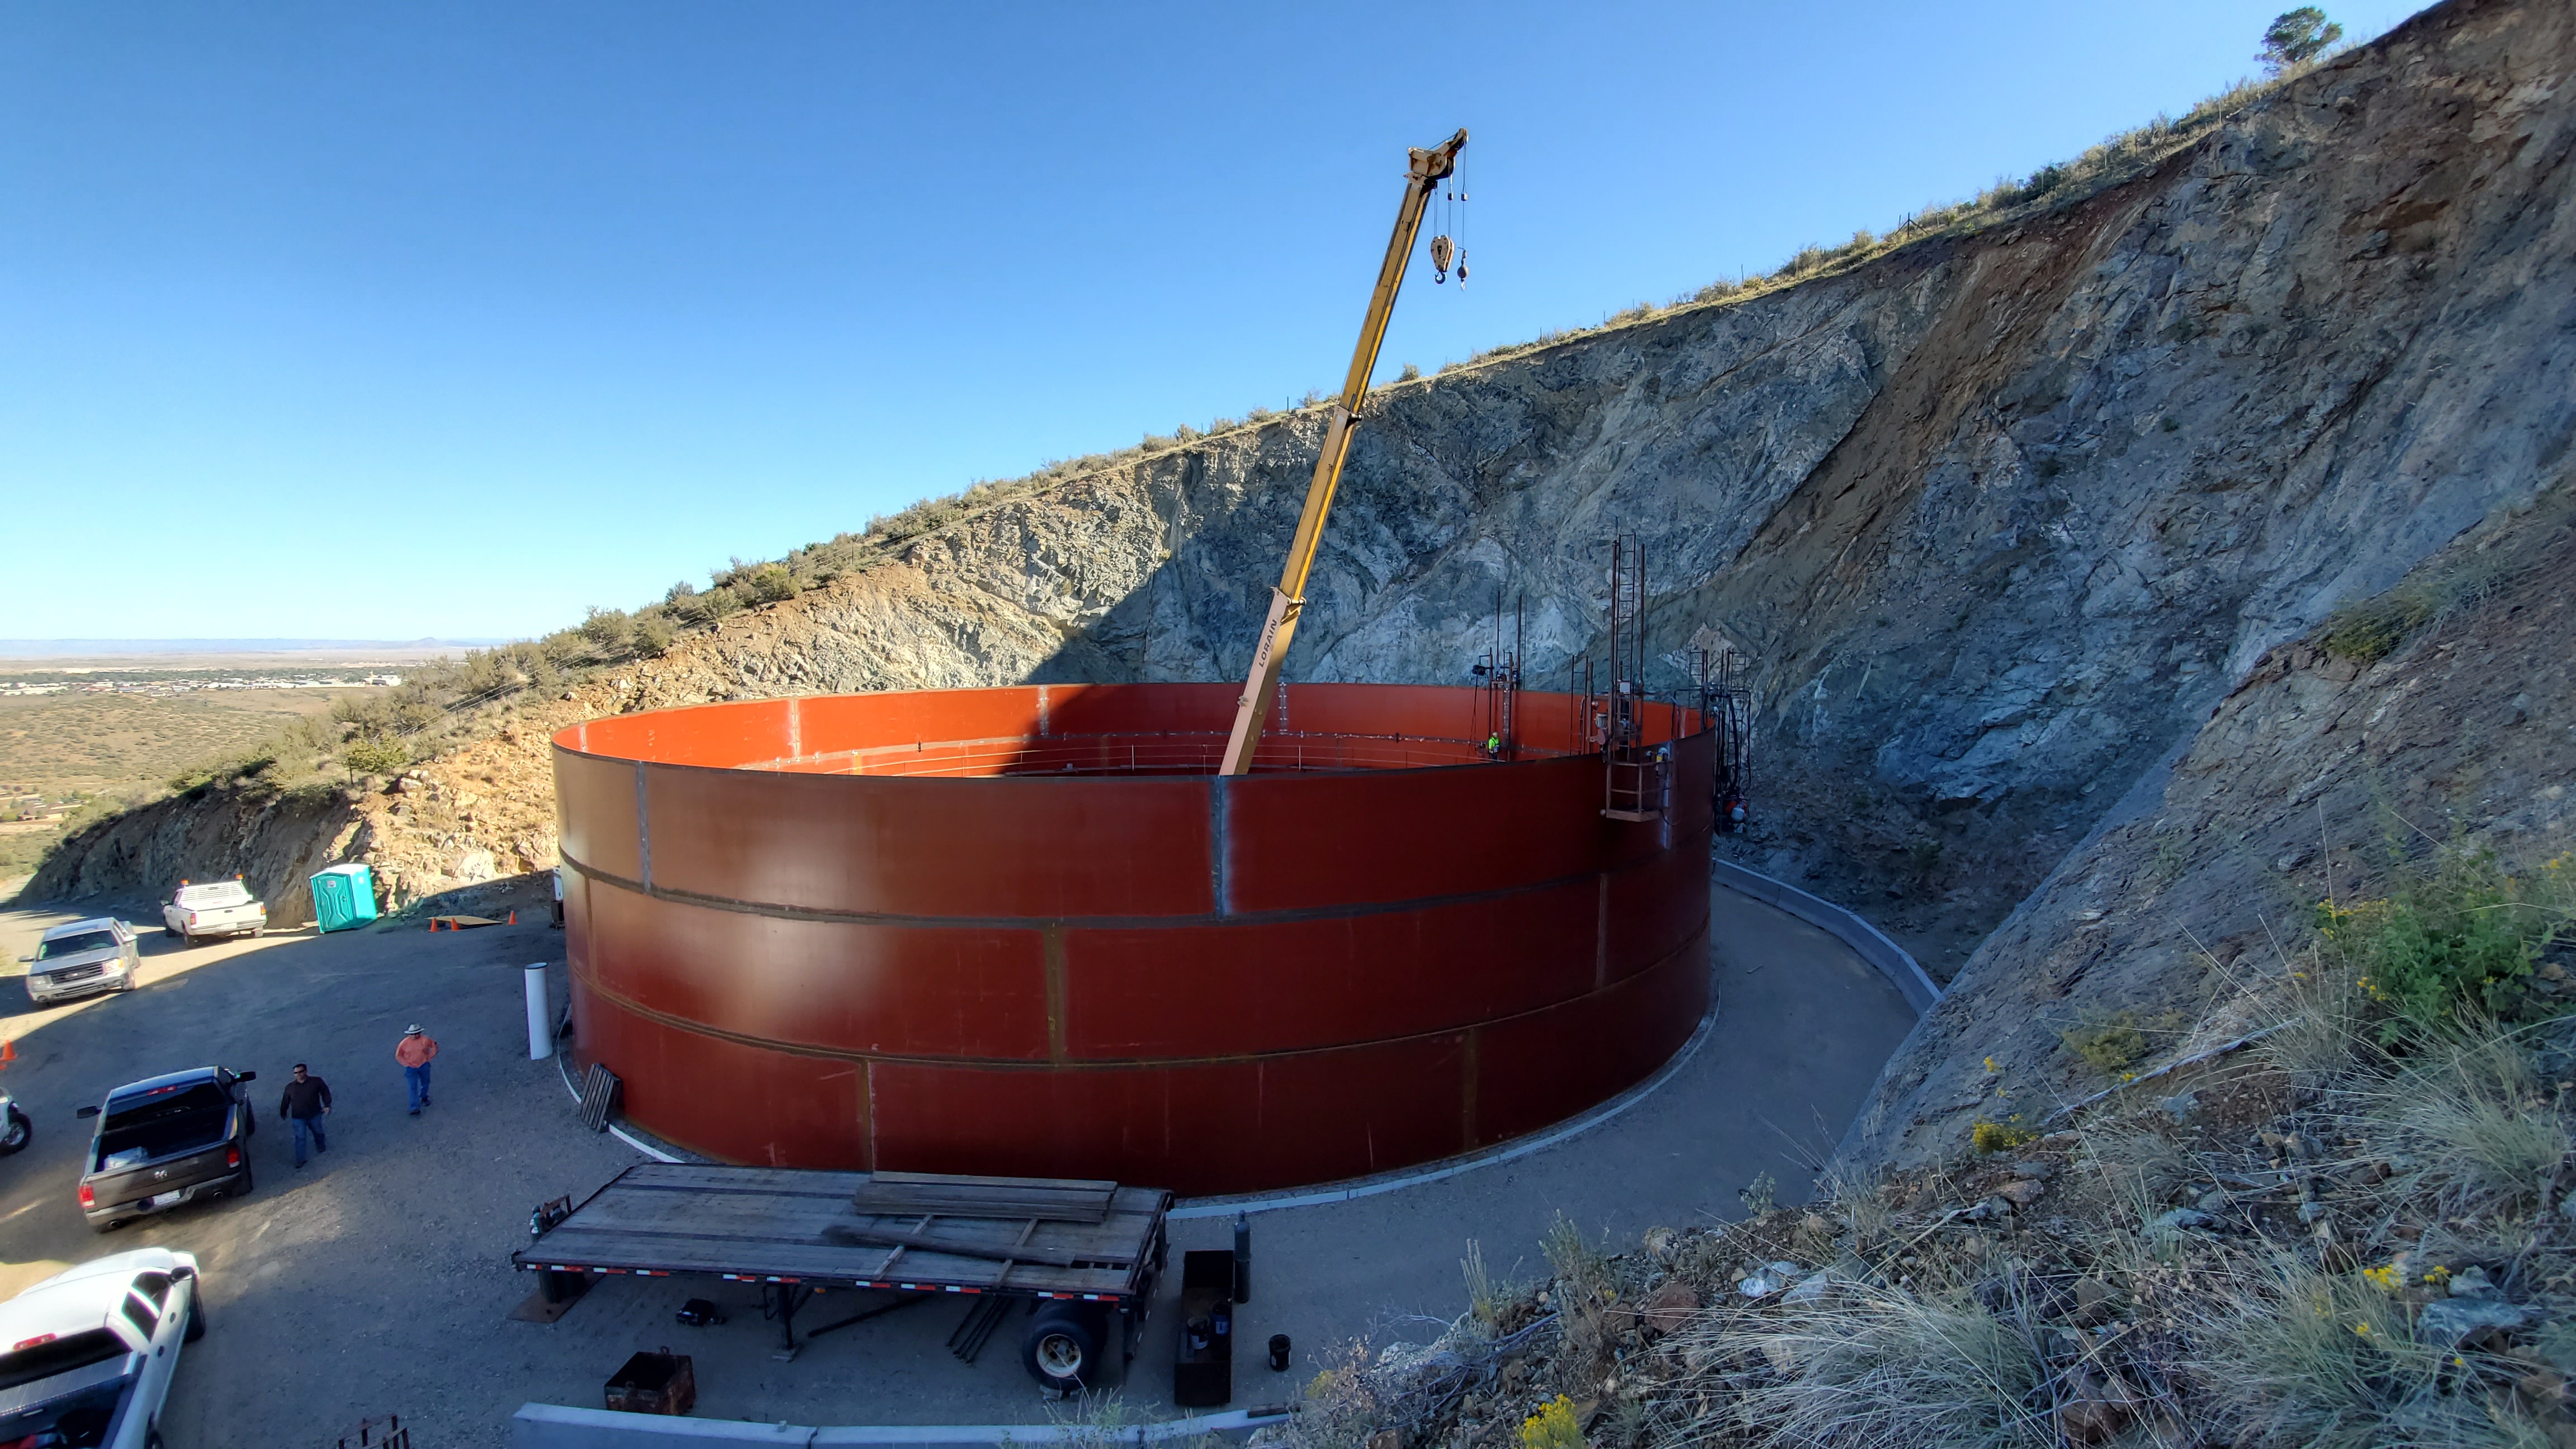 STONERIDGE TANK AT 24' HIGH -ONE RING TO GO 2019-10-01